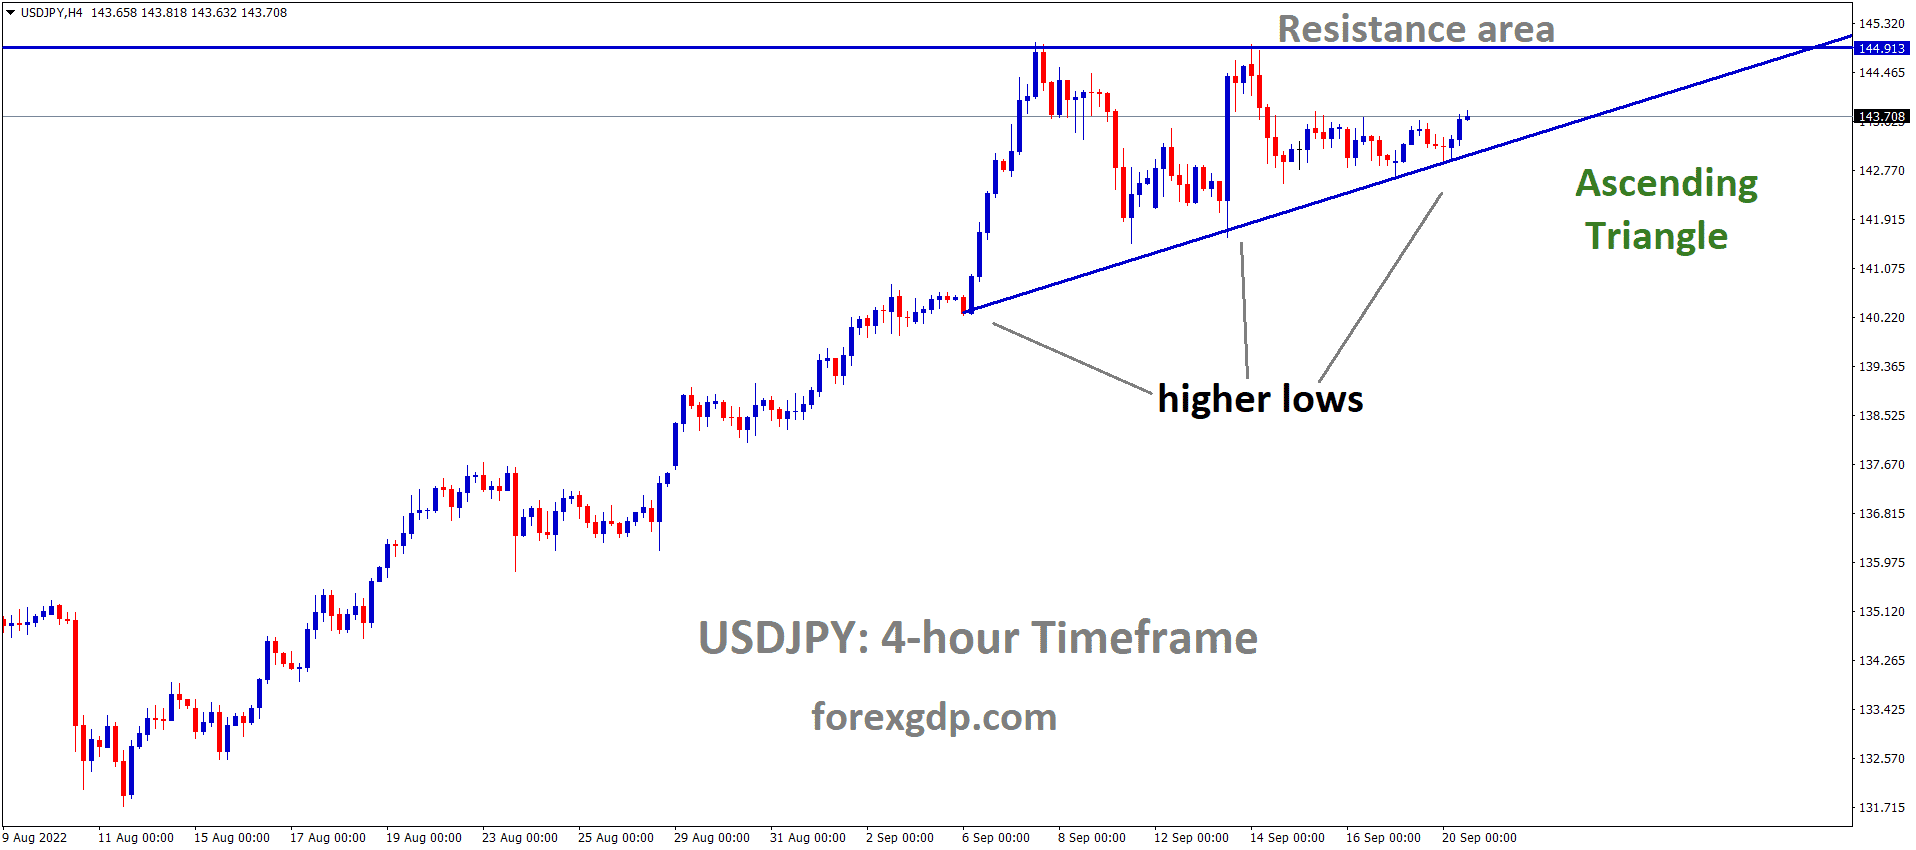 USDJPY is moving in an Ascending triangle pattern and the market has rebounded from the higher low area of the Ascending triangle pattern.